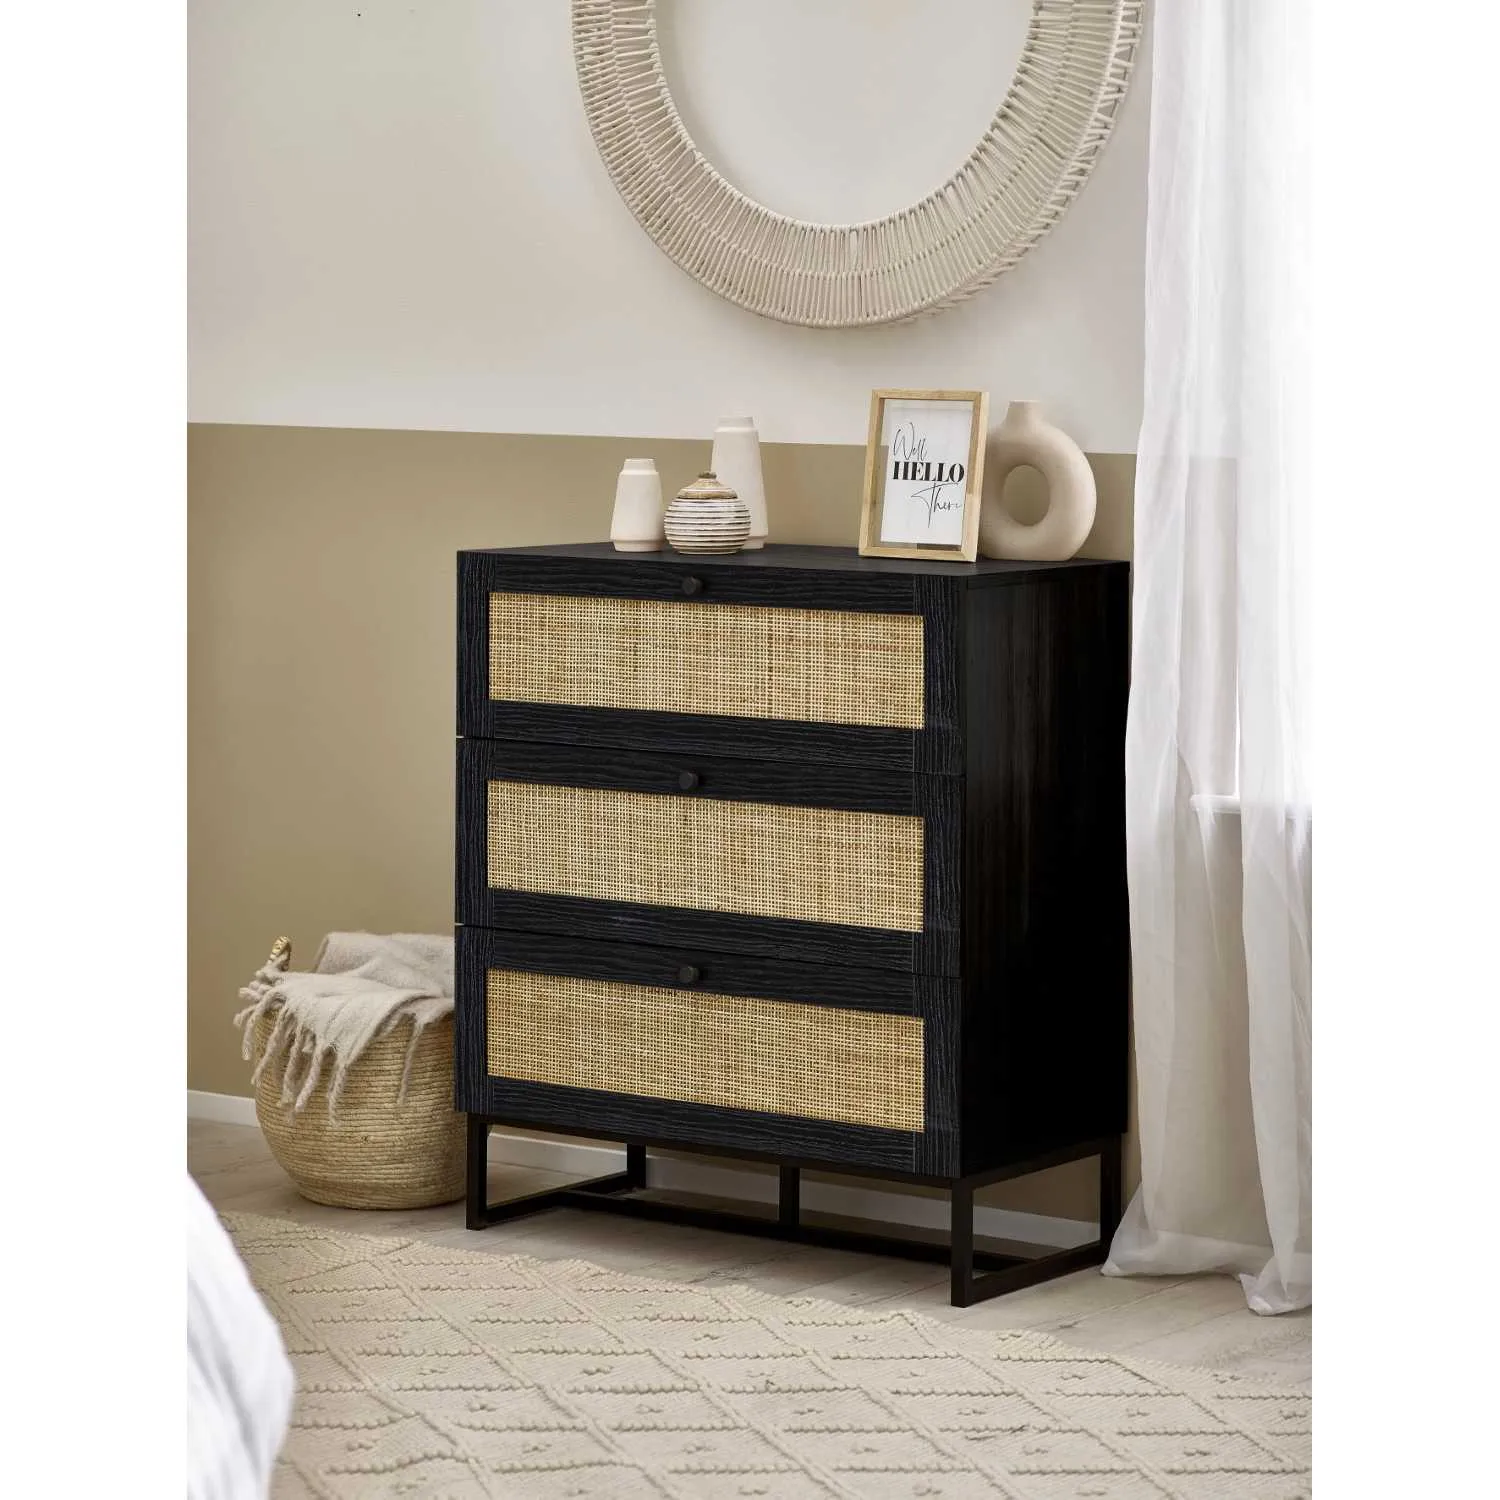 Padstow 3 Drawer Chest Black